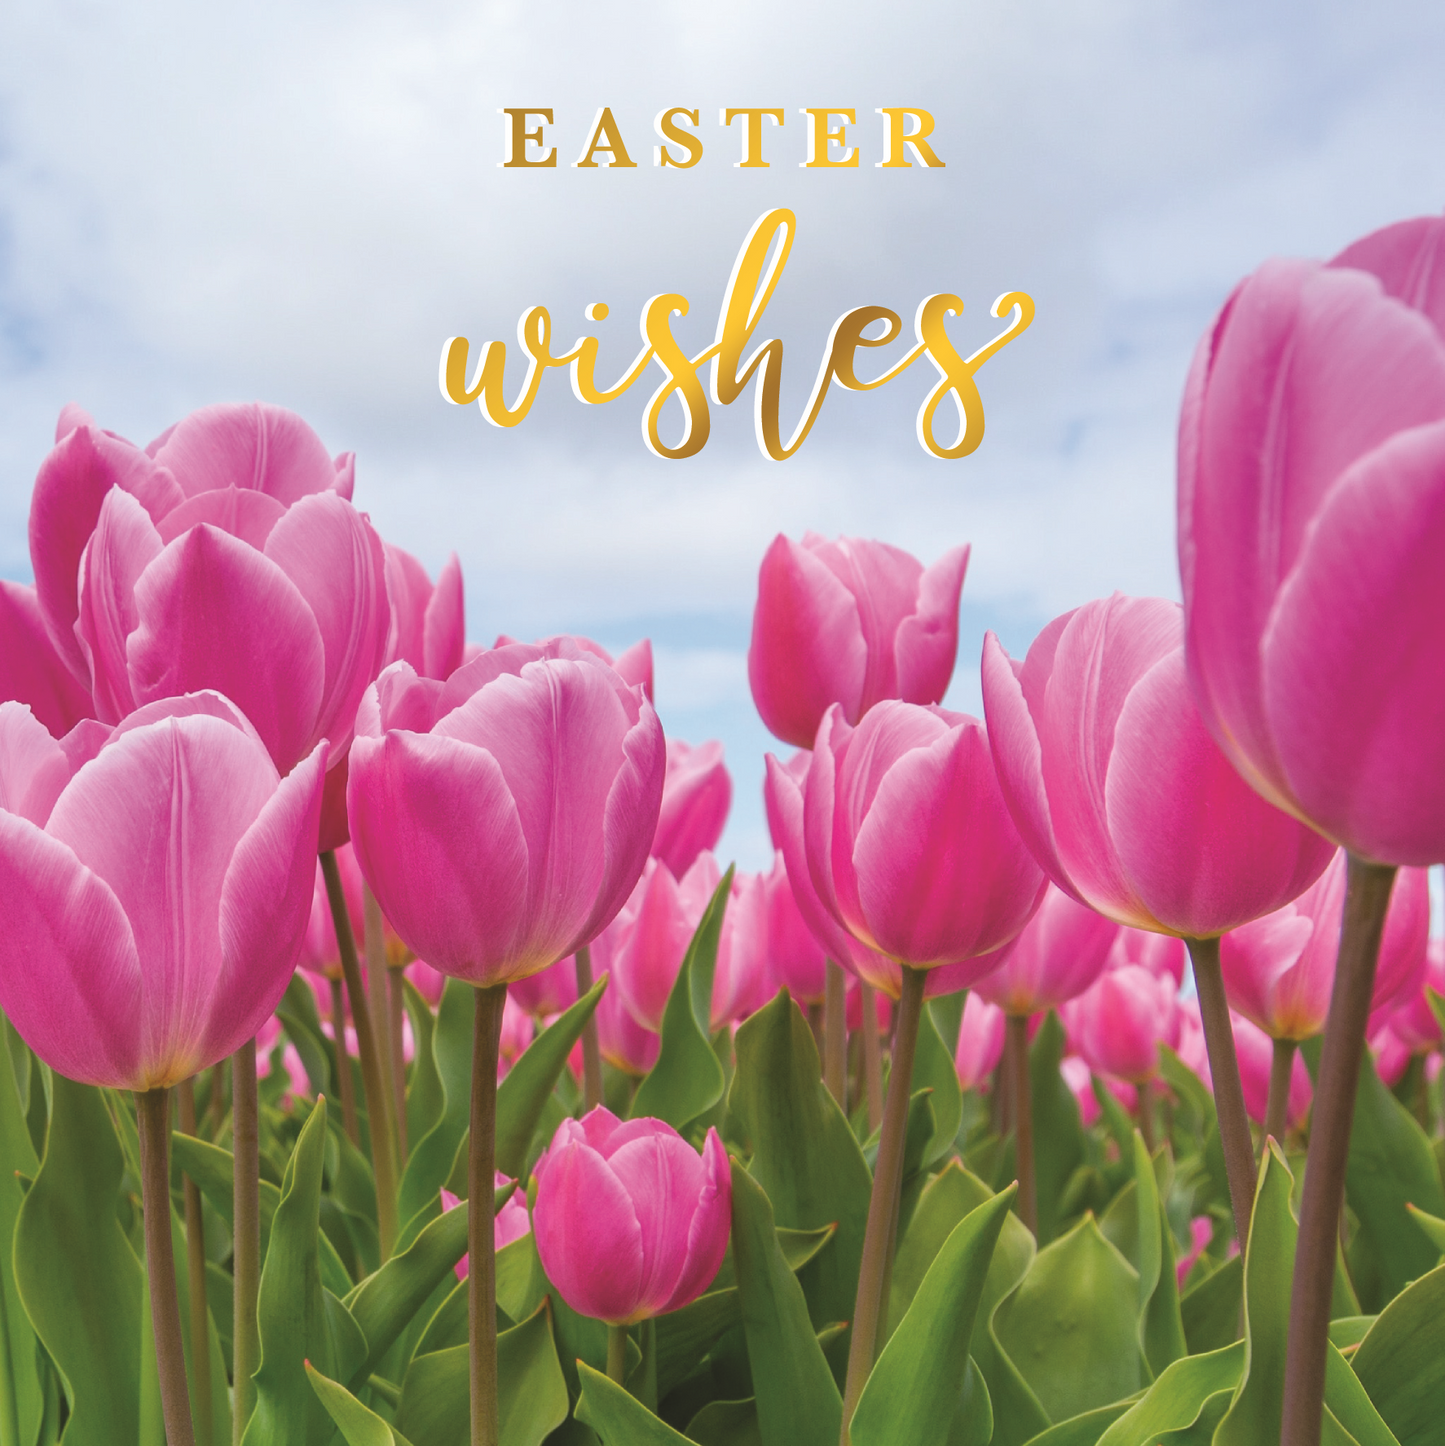 Easter Wishes Tulip Field Photographic Easter Greeting Card